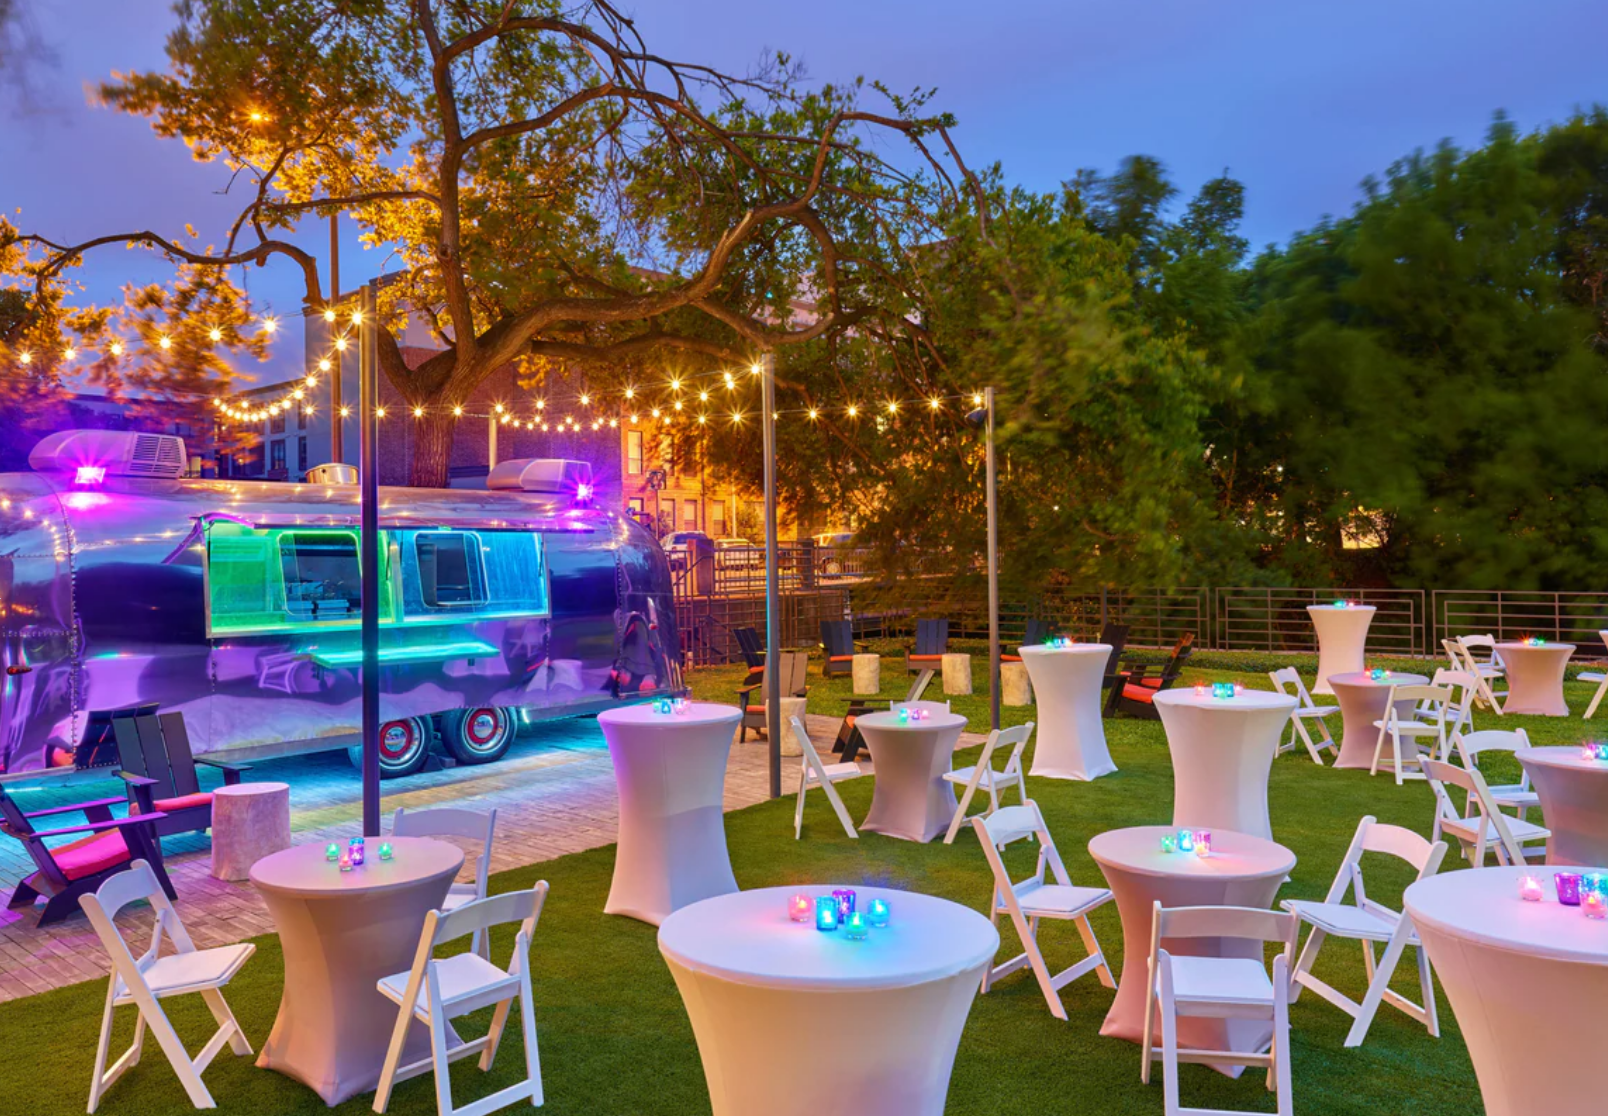 Hotel outdoor party space with food truck